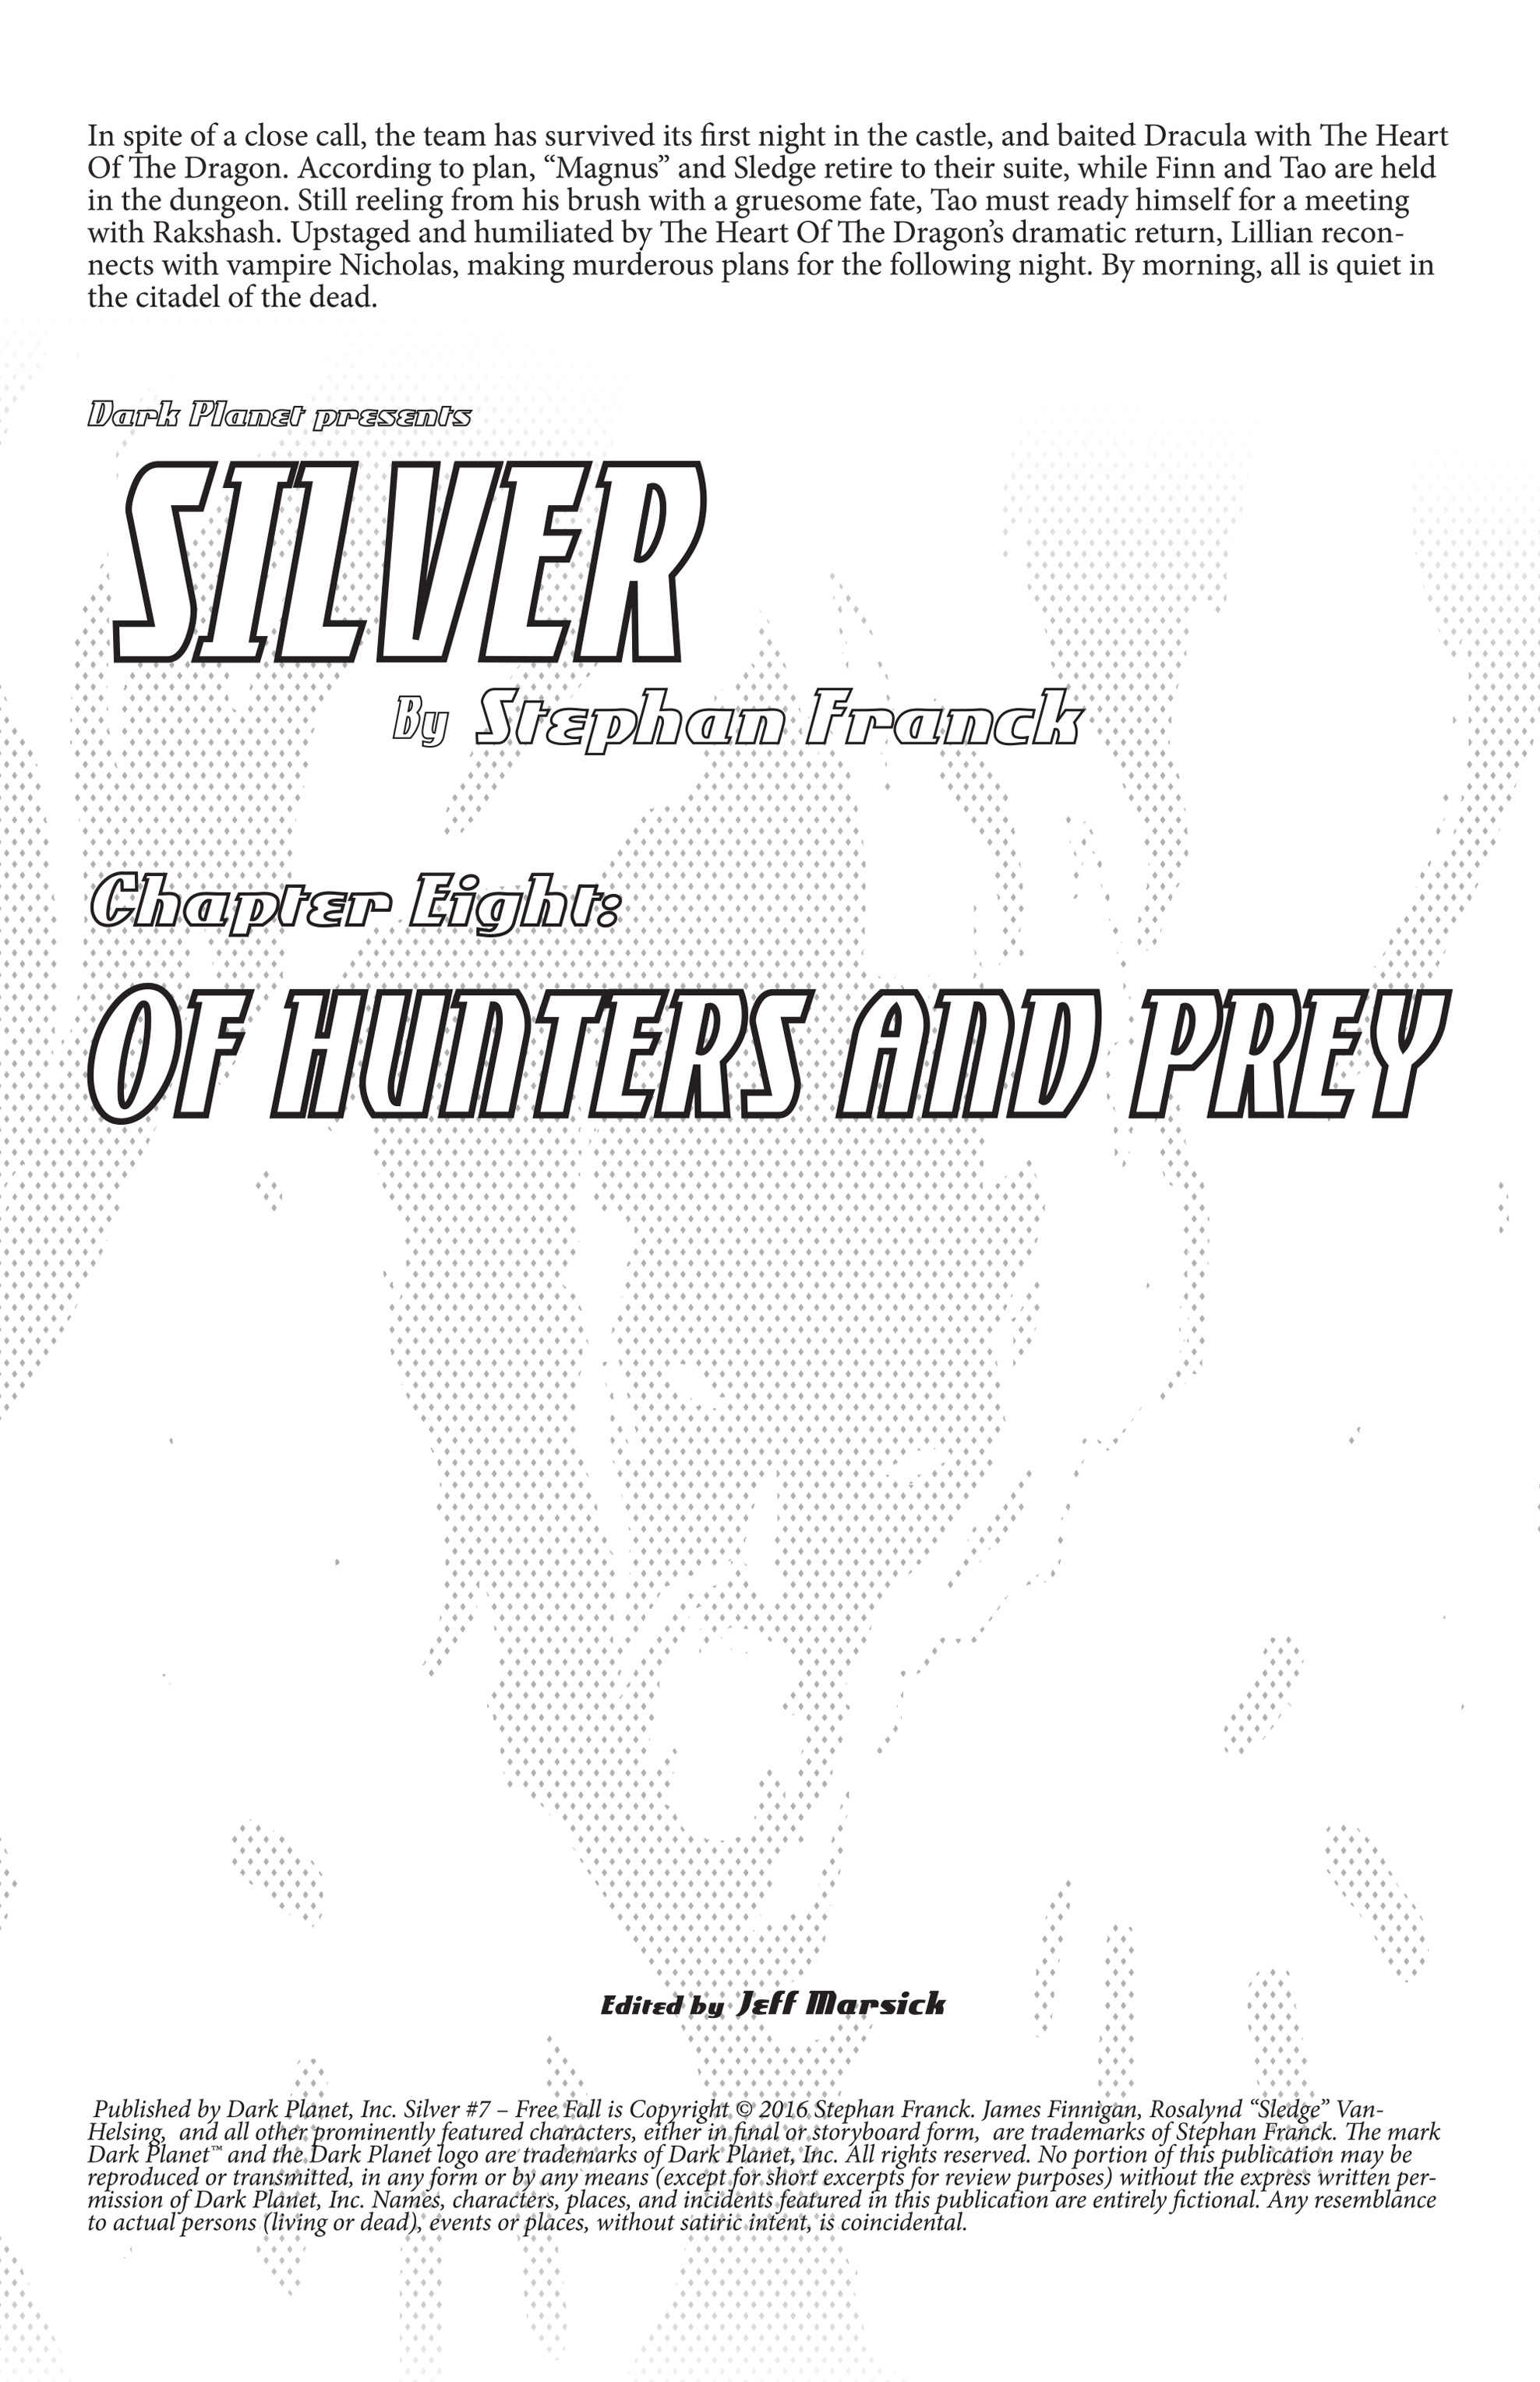 Read online Silver comic -  Issue #7 - 2